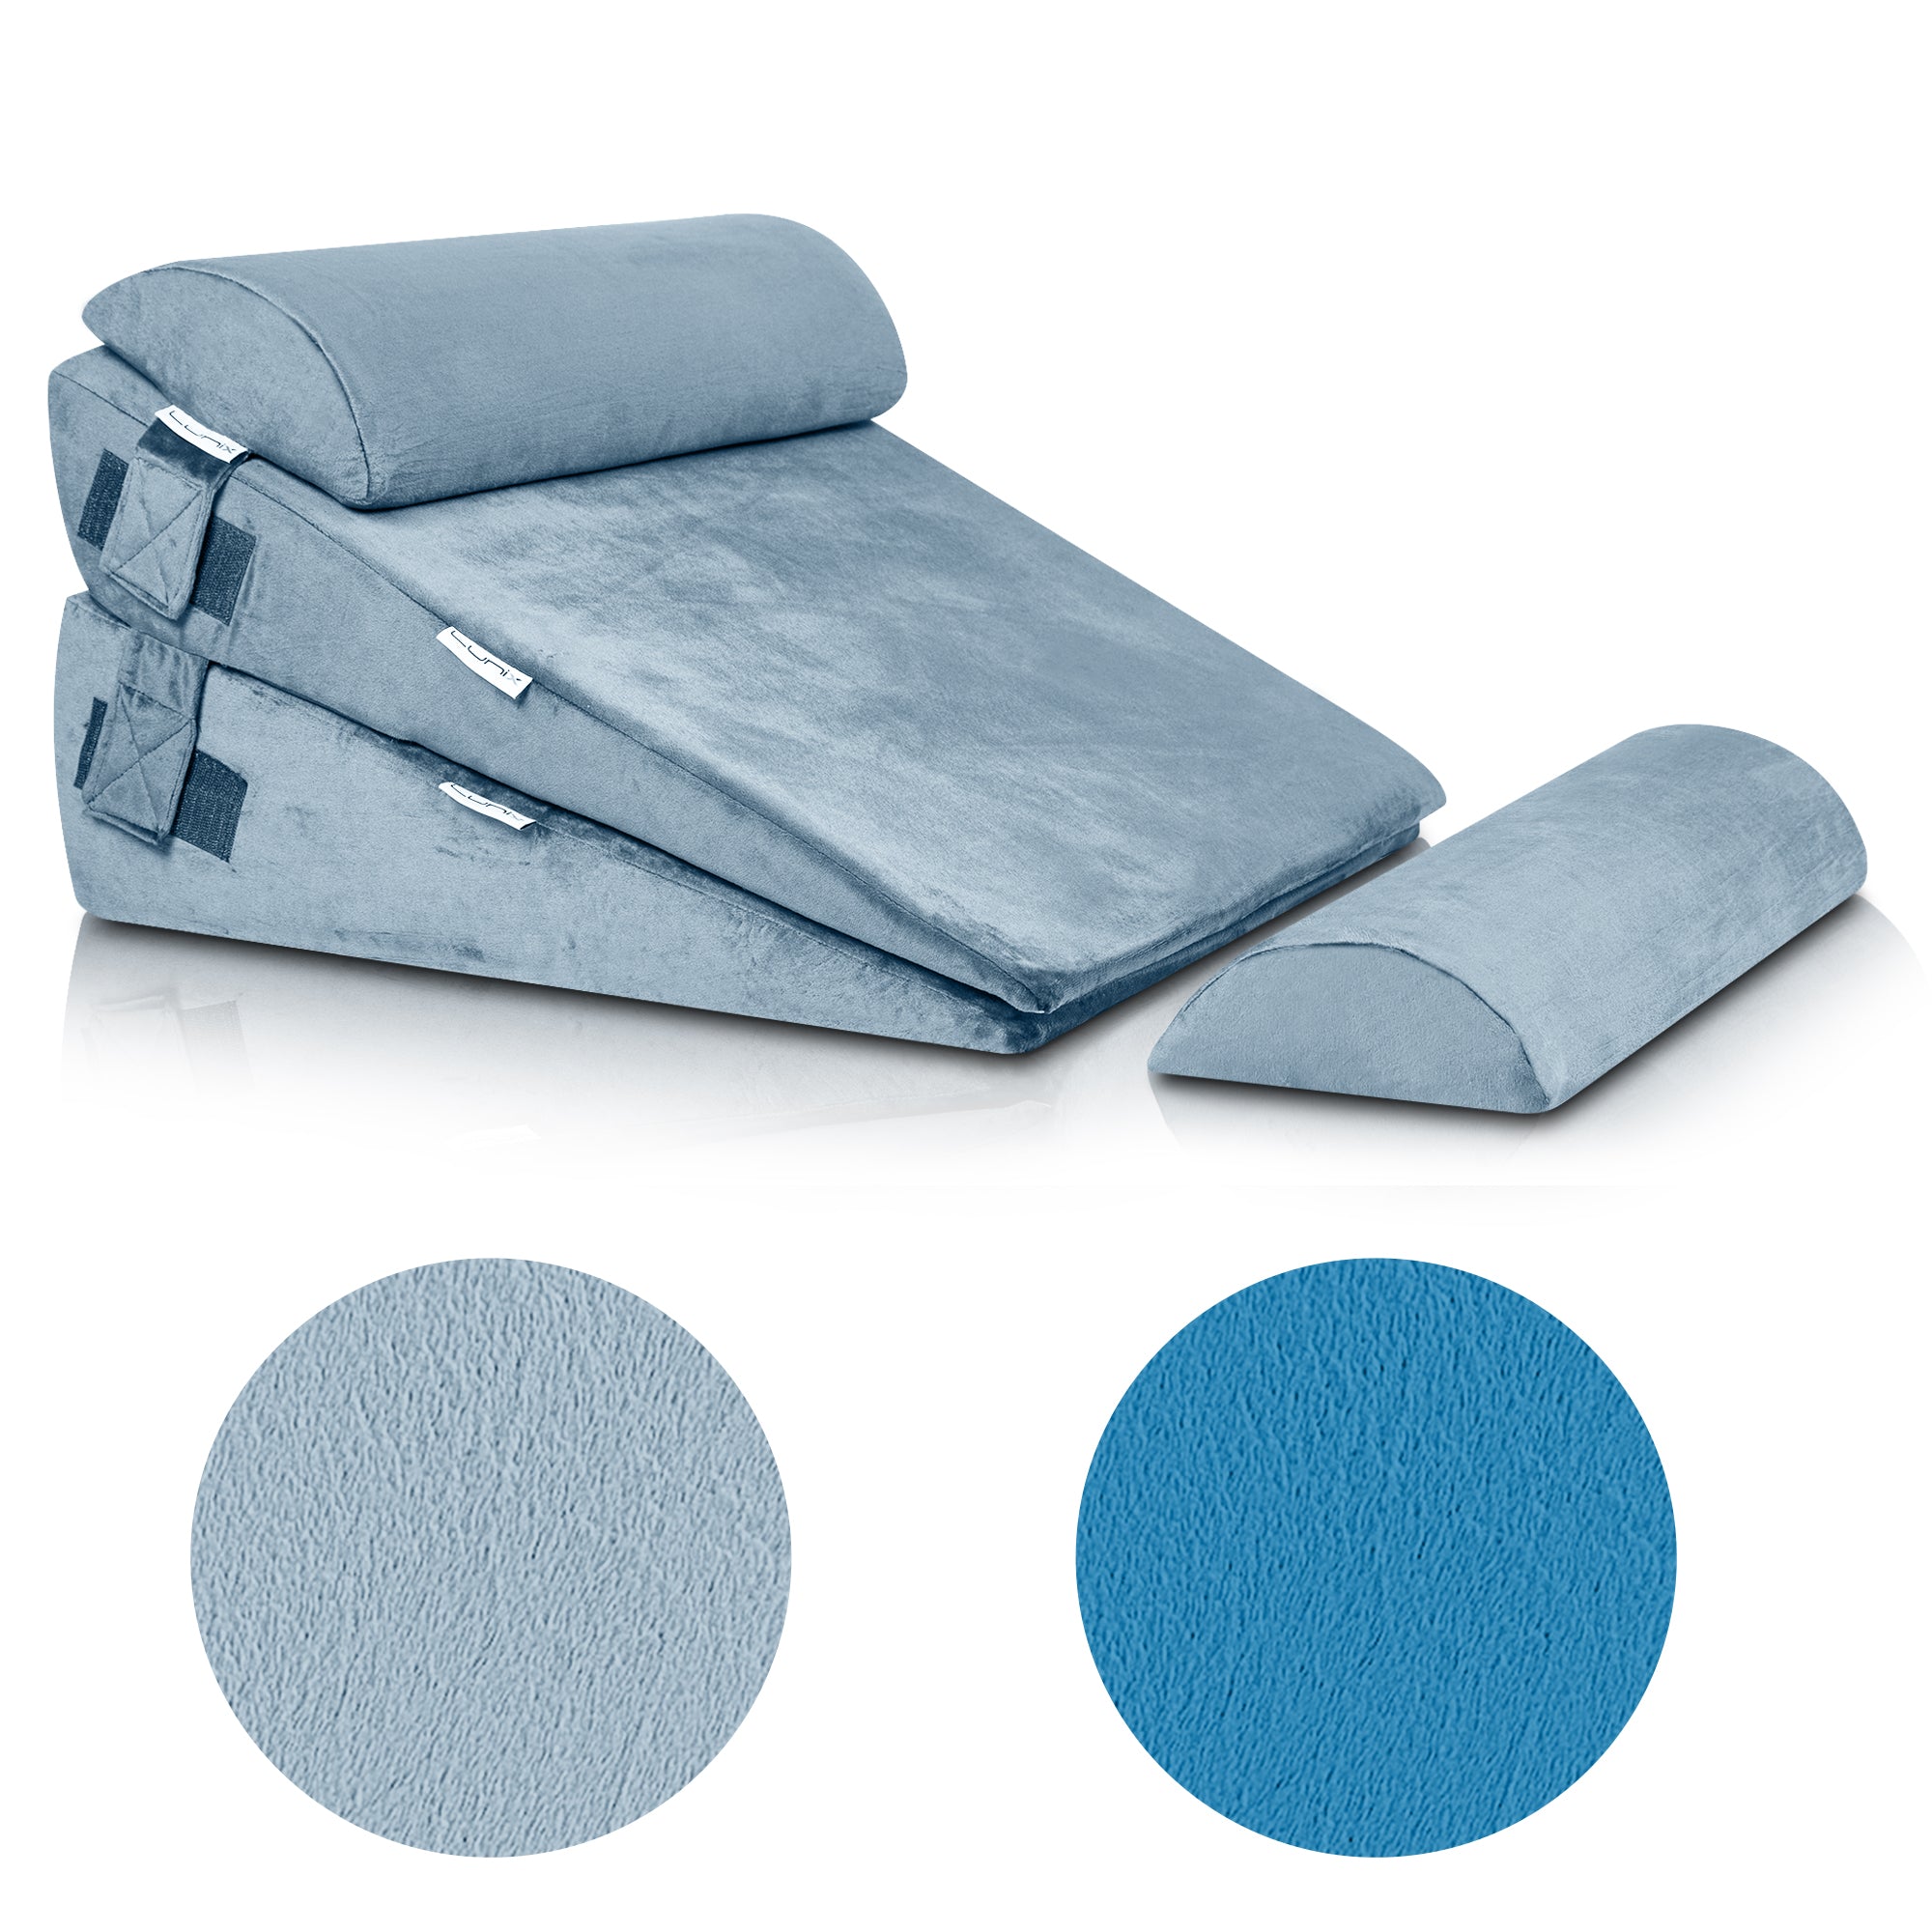 Cover Set Only for LX8 2 Layers, Gray, Pillows and Foam not Included